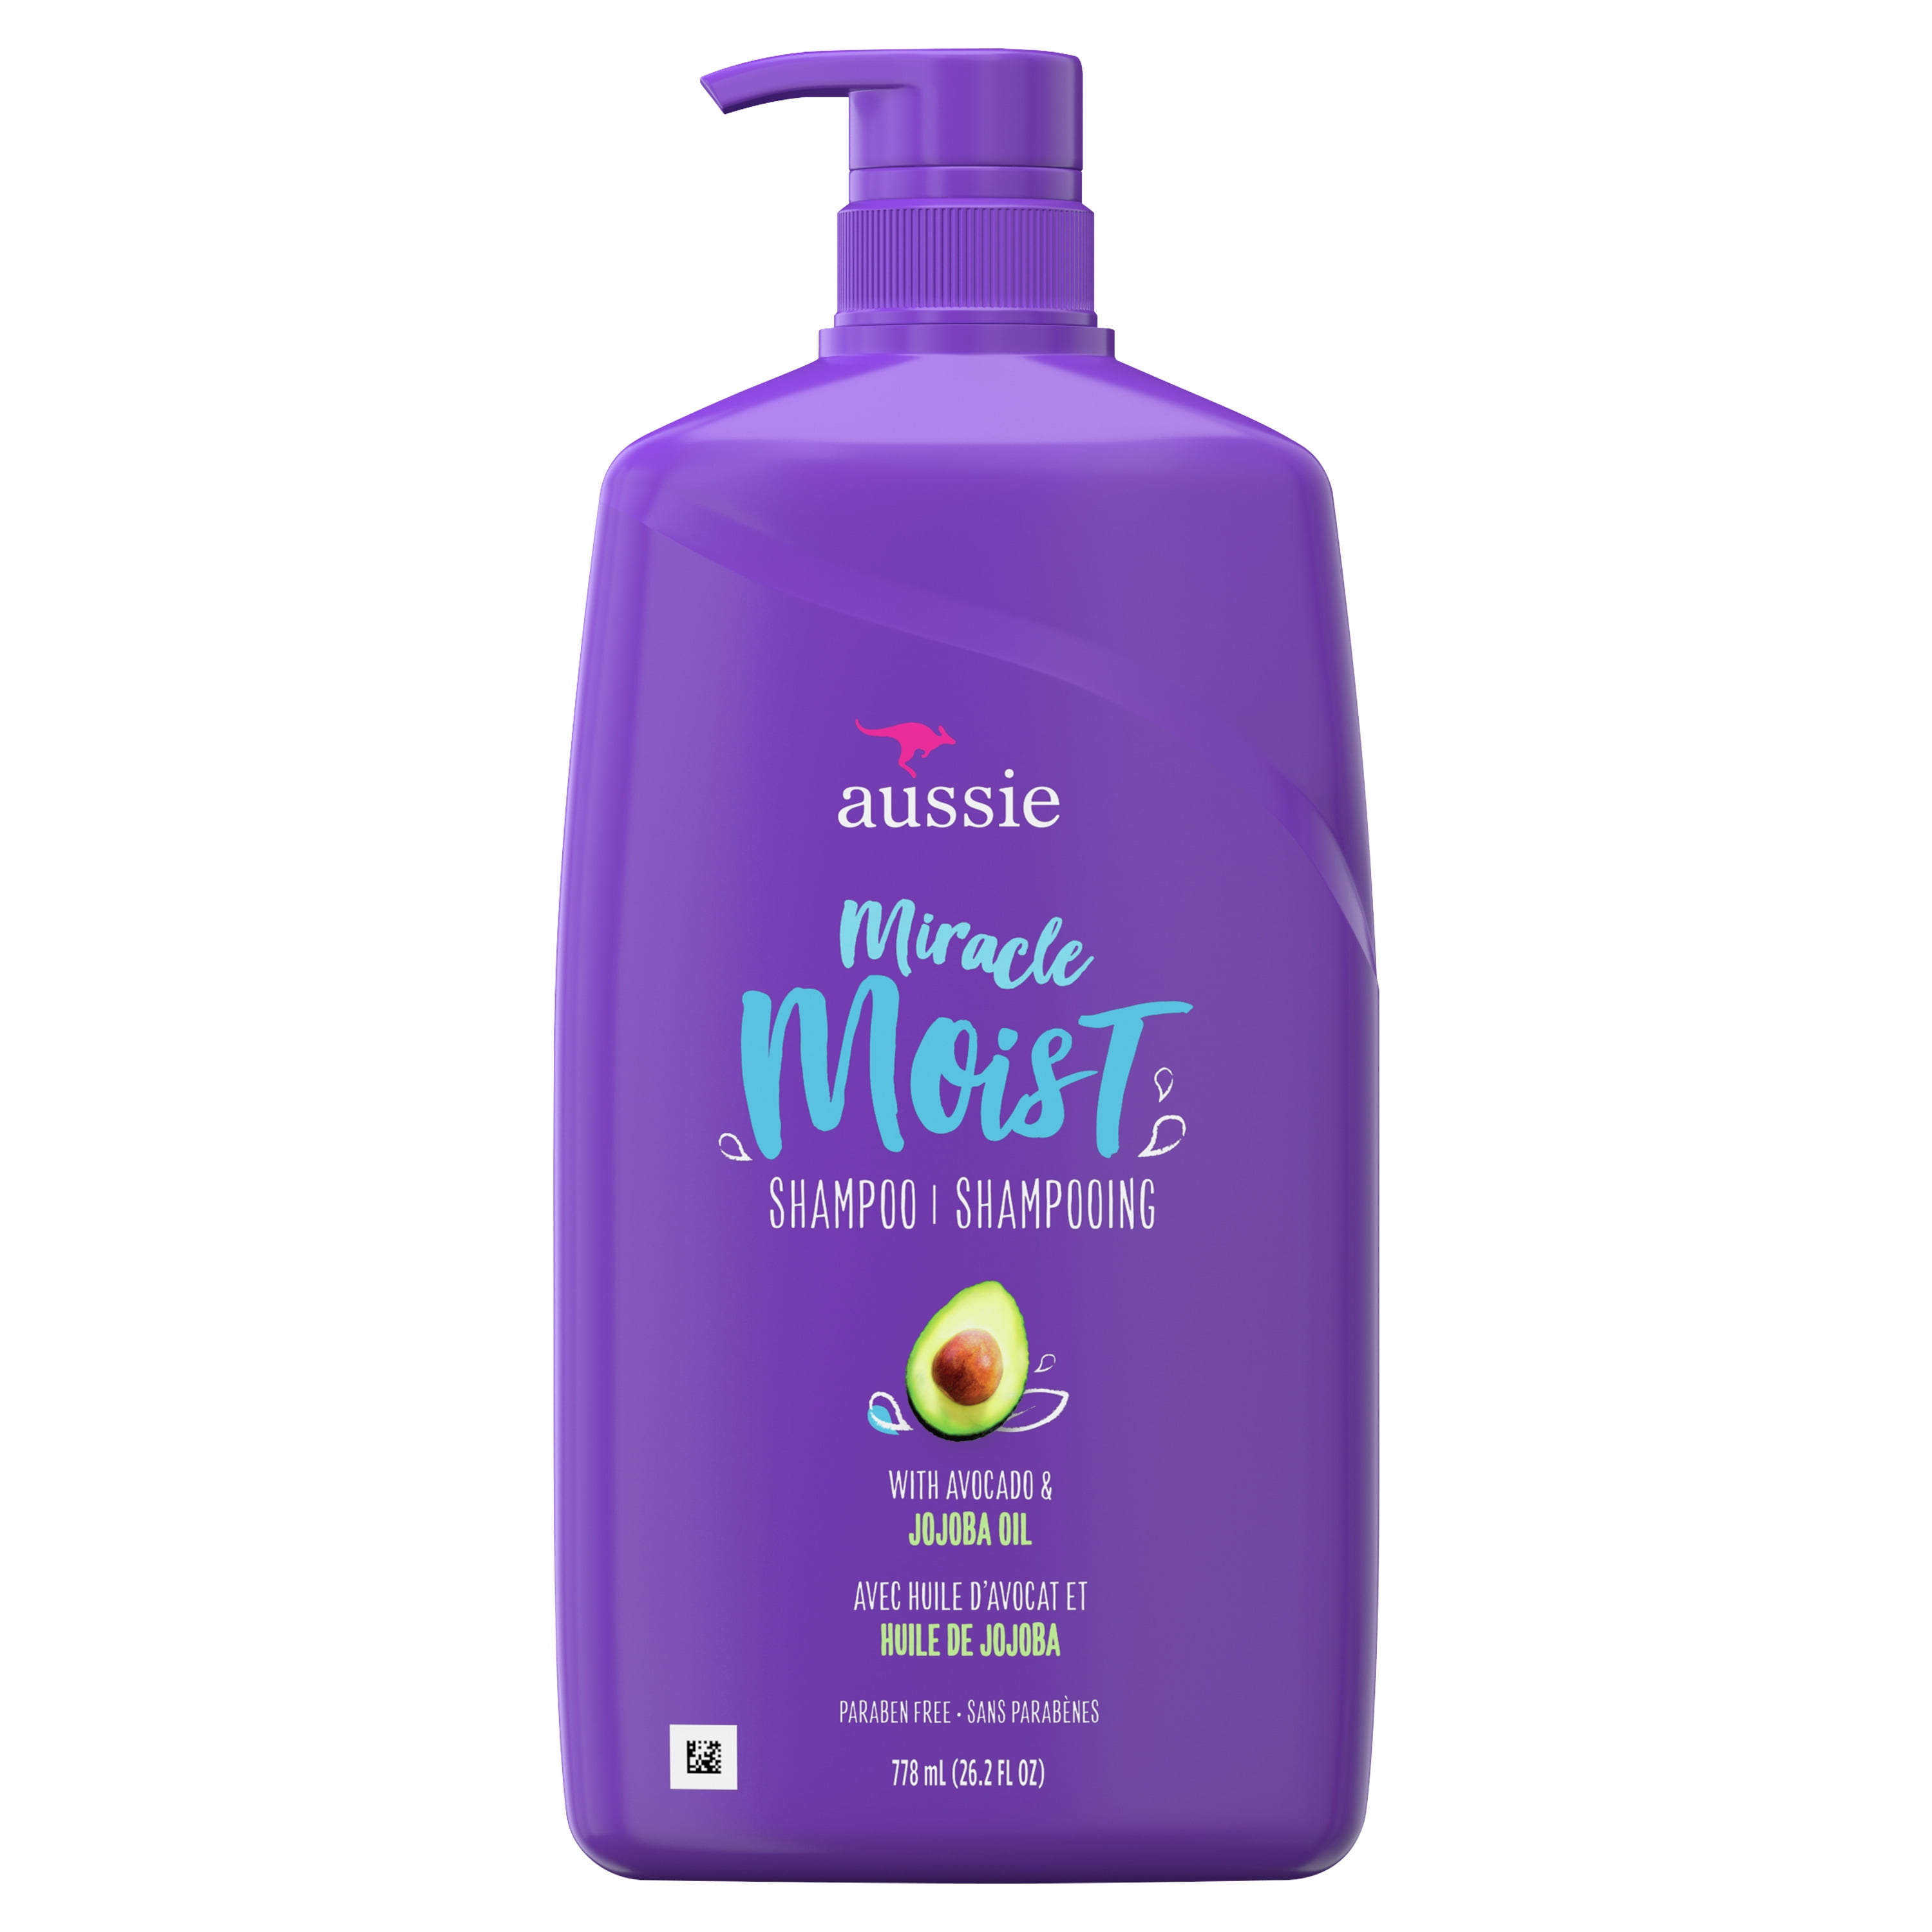 Ud over sommer sædvanligt Aussie Miracle Moist Shampoo with Avocado, Paraben Free, 26.2 fl oz -  Walmart.com